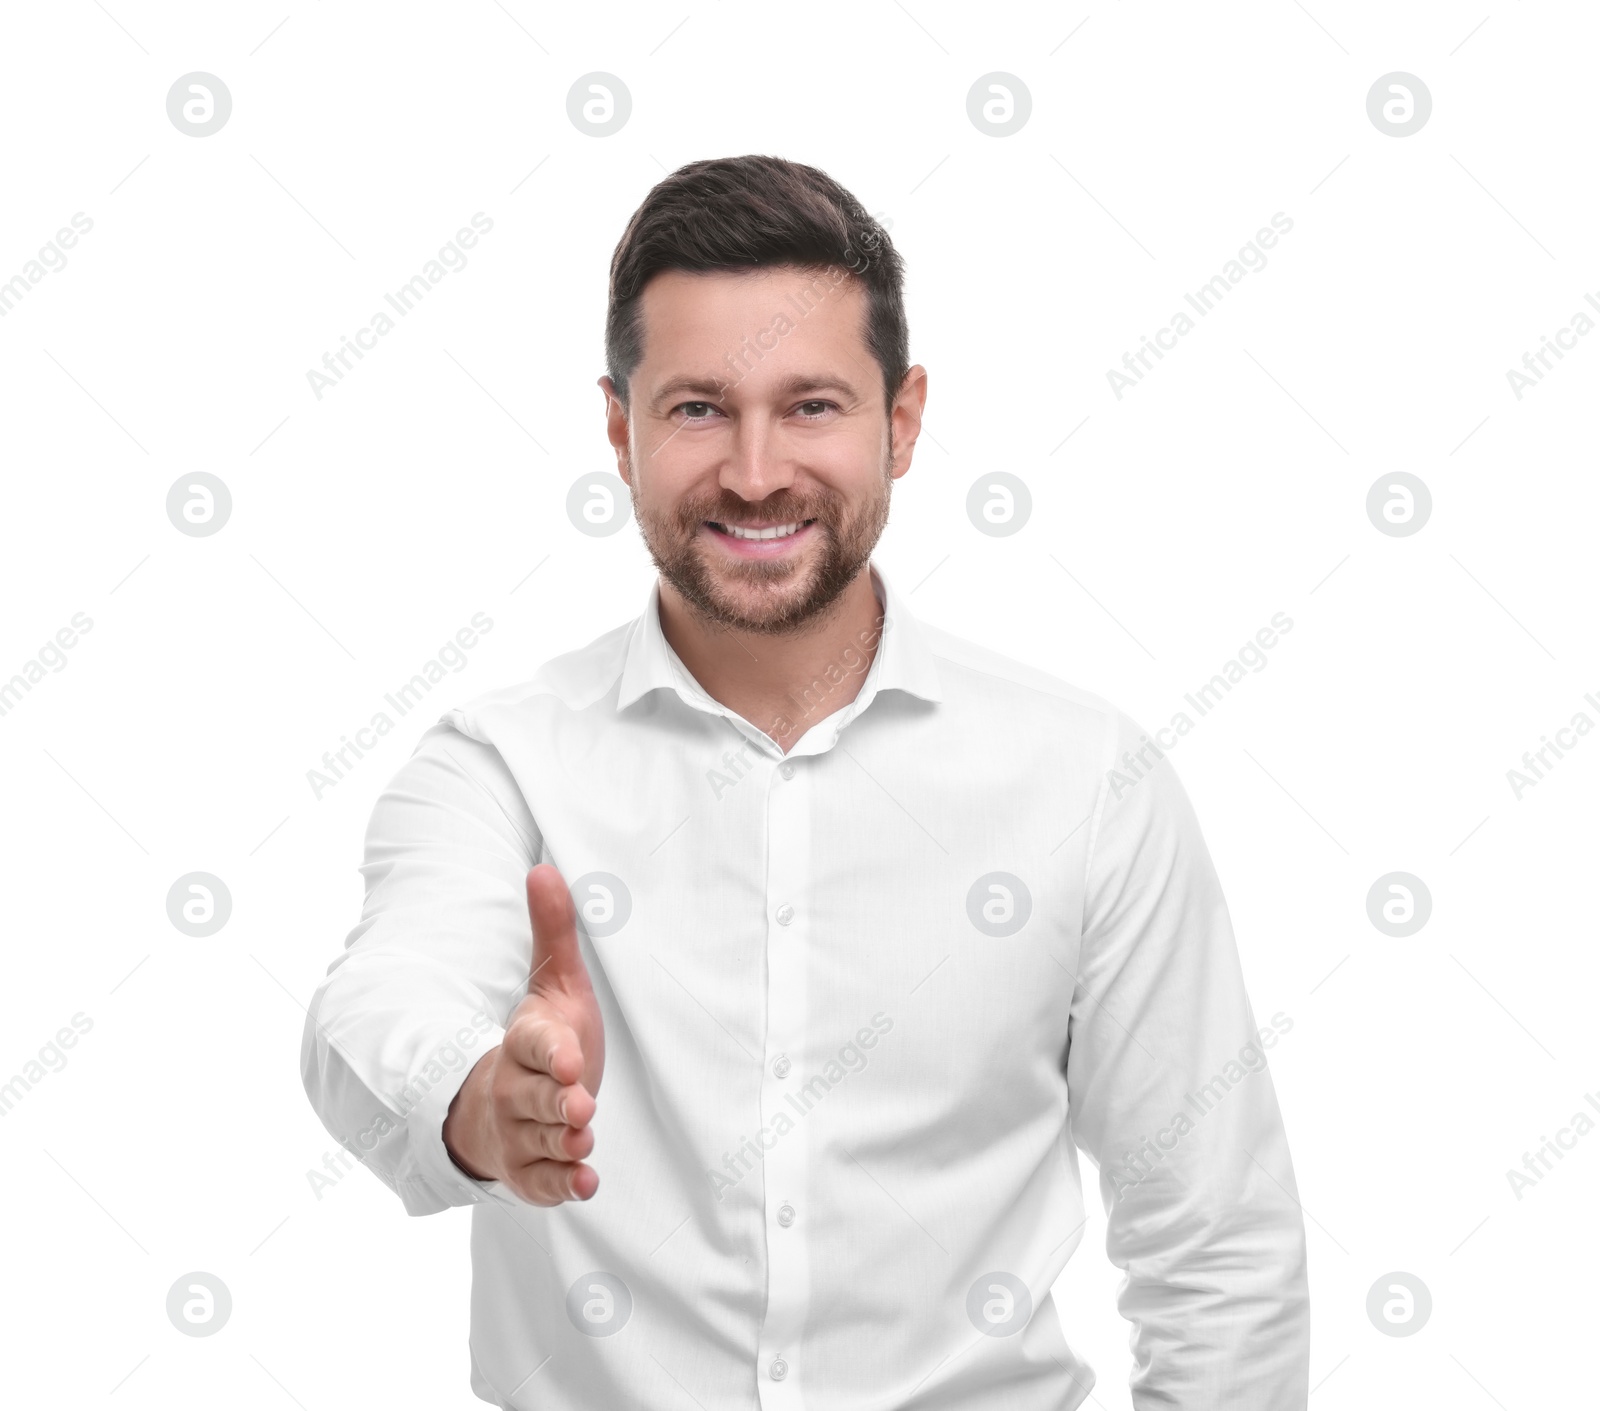 Photo of Happy man welcoming and offering handshake on white background